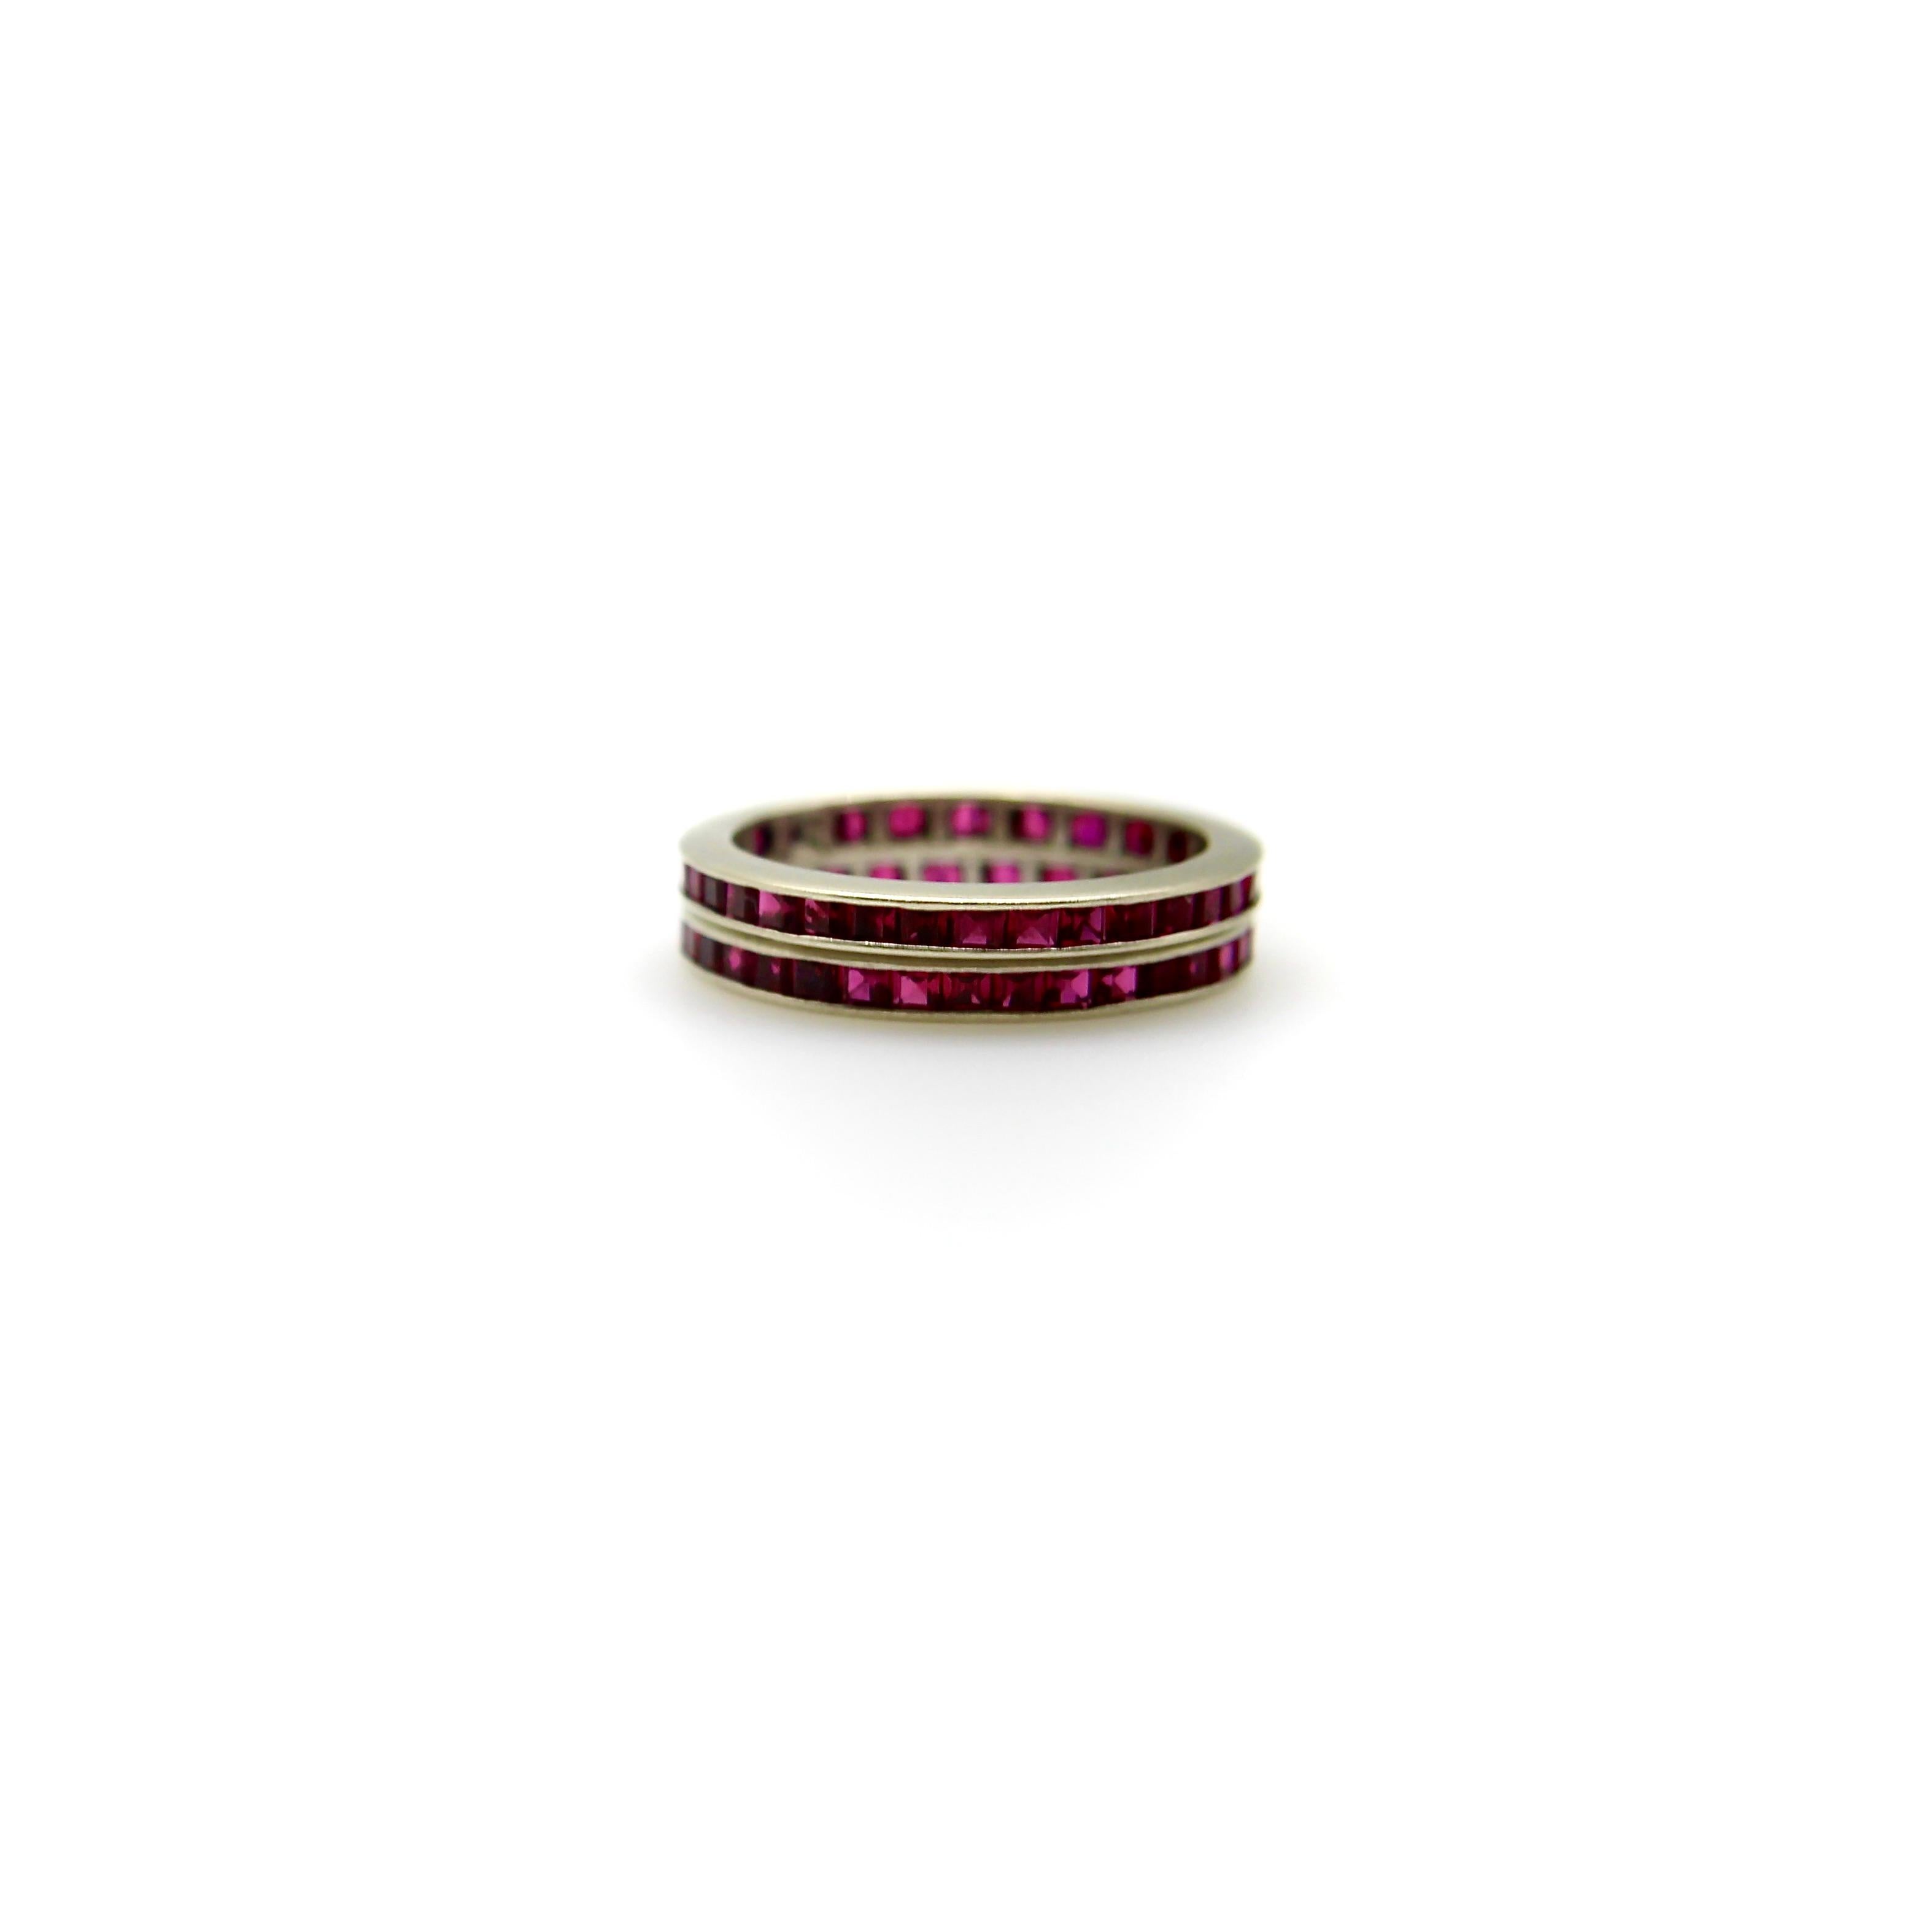 This 14k white gold ring contains square Table Cut rubies channel set into an eternity band. The rubies have a rich red color and the lines of the square stones catch the light in a beautiful sparkle. 

The band contain 34 synthetic rubies. It is